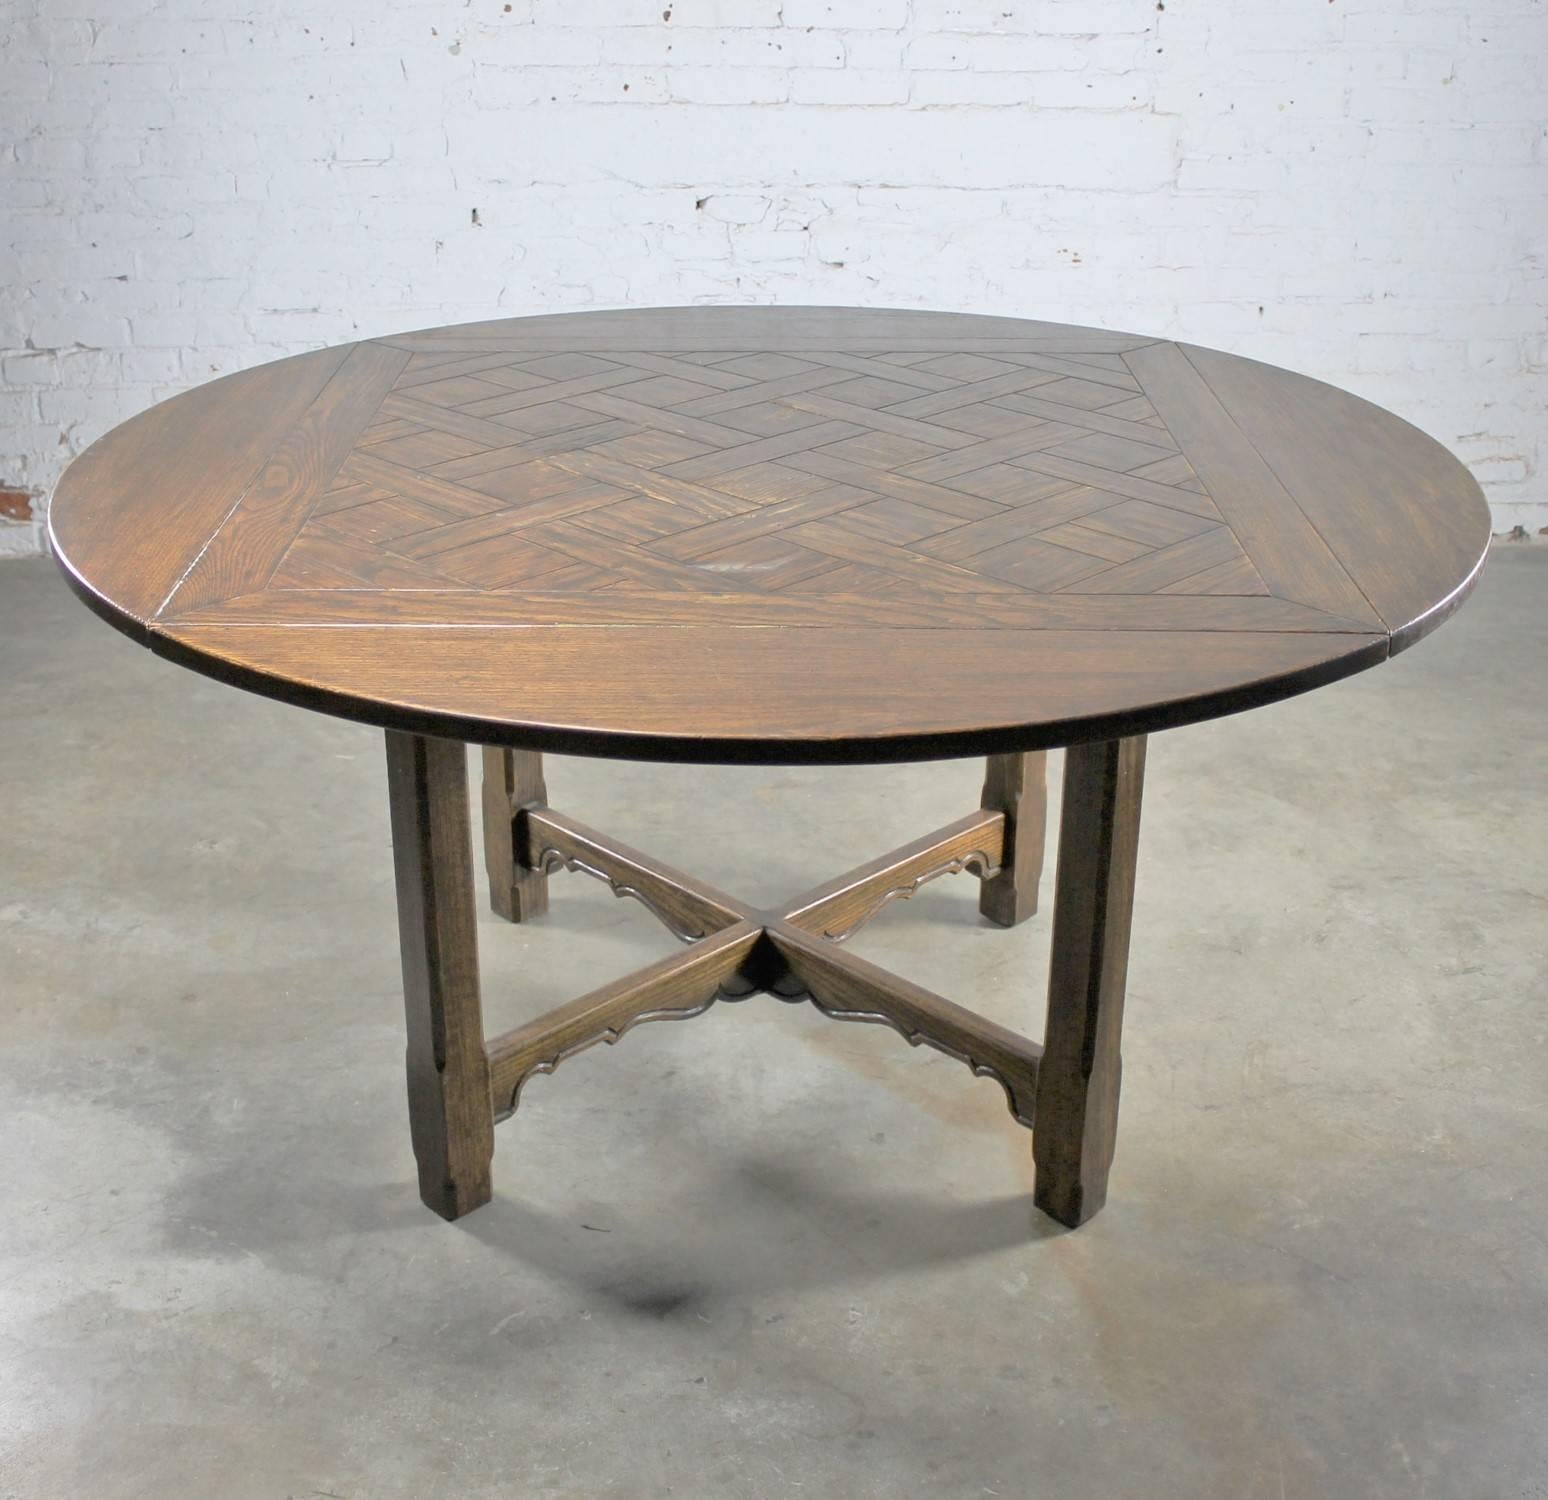 Handsome vintage oak table in the manner of an old English pub table with a square-round style parquet top. This table is naturally distressed.

What an awesome table for your wine room! Or, maybe your game room or breakfast room. Wherever you use